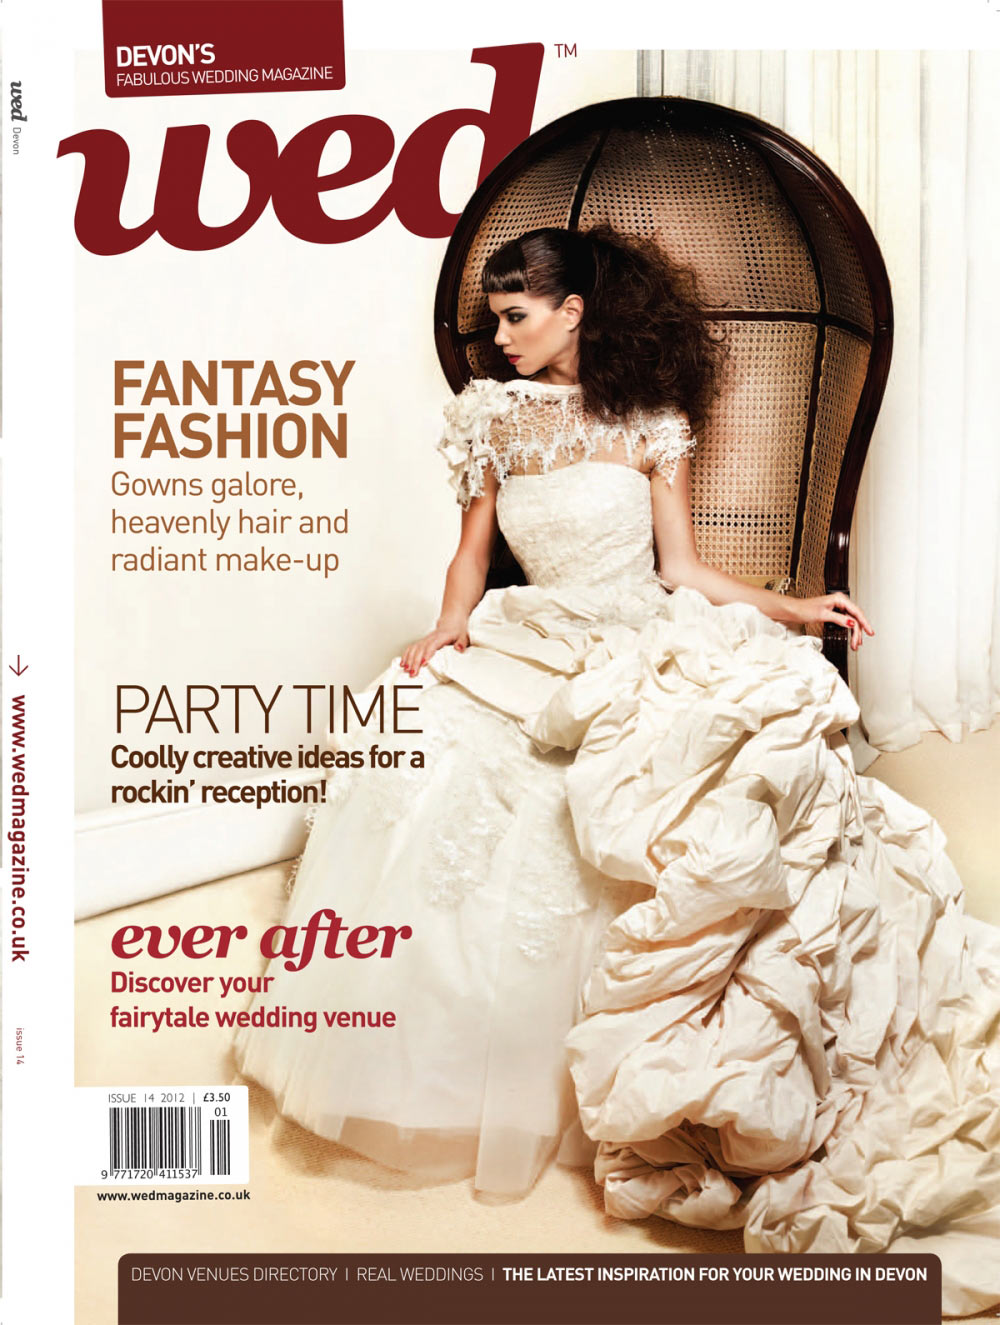 New Devon Wed Out Now!